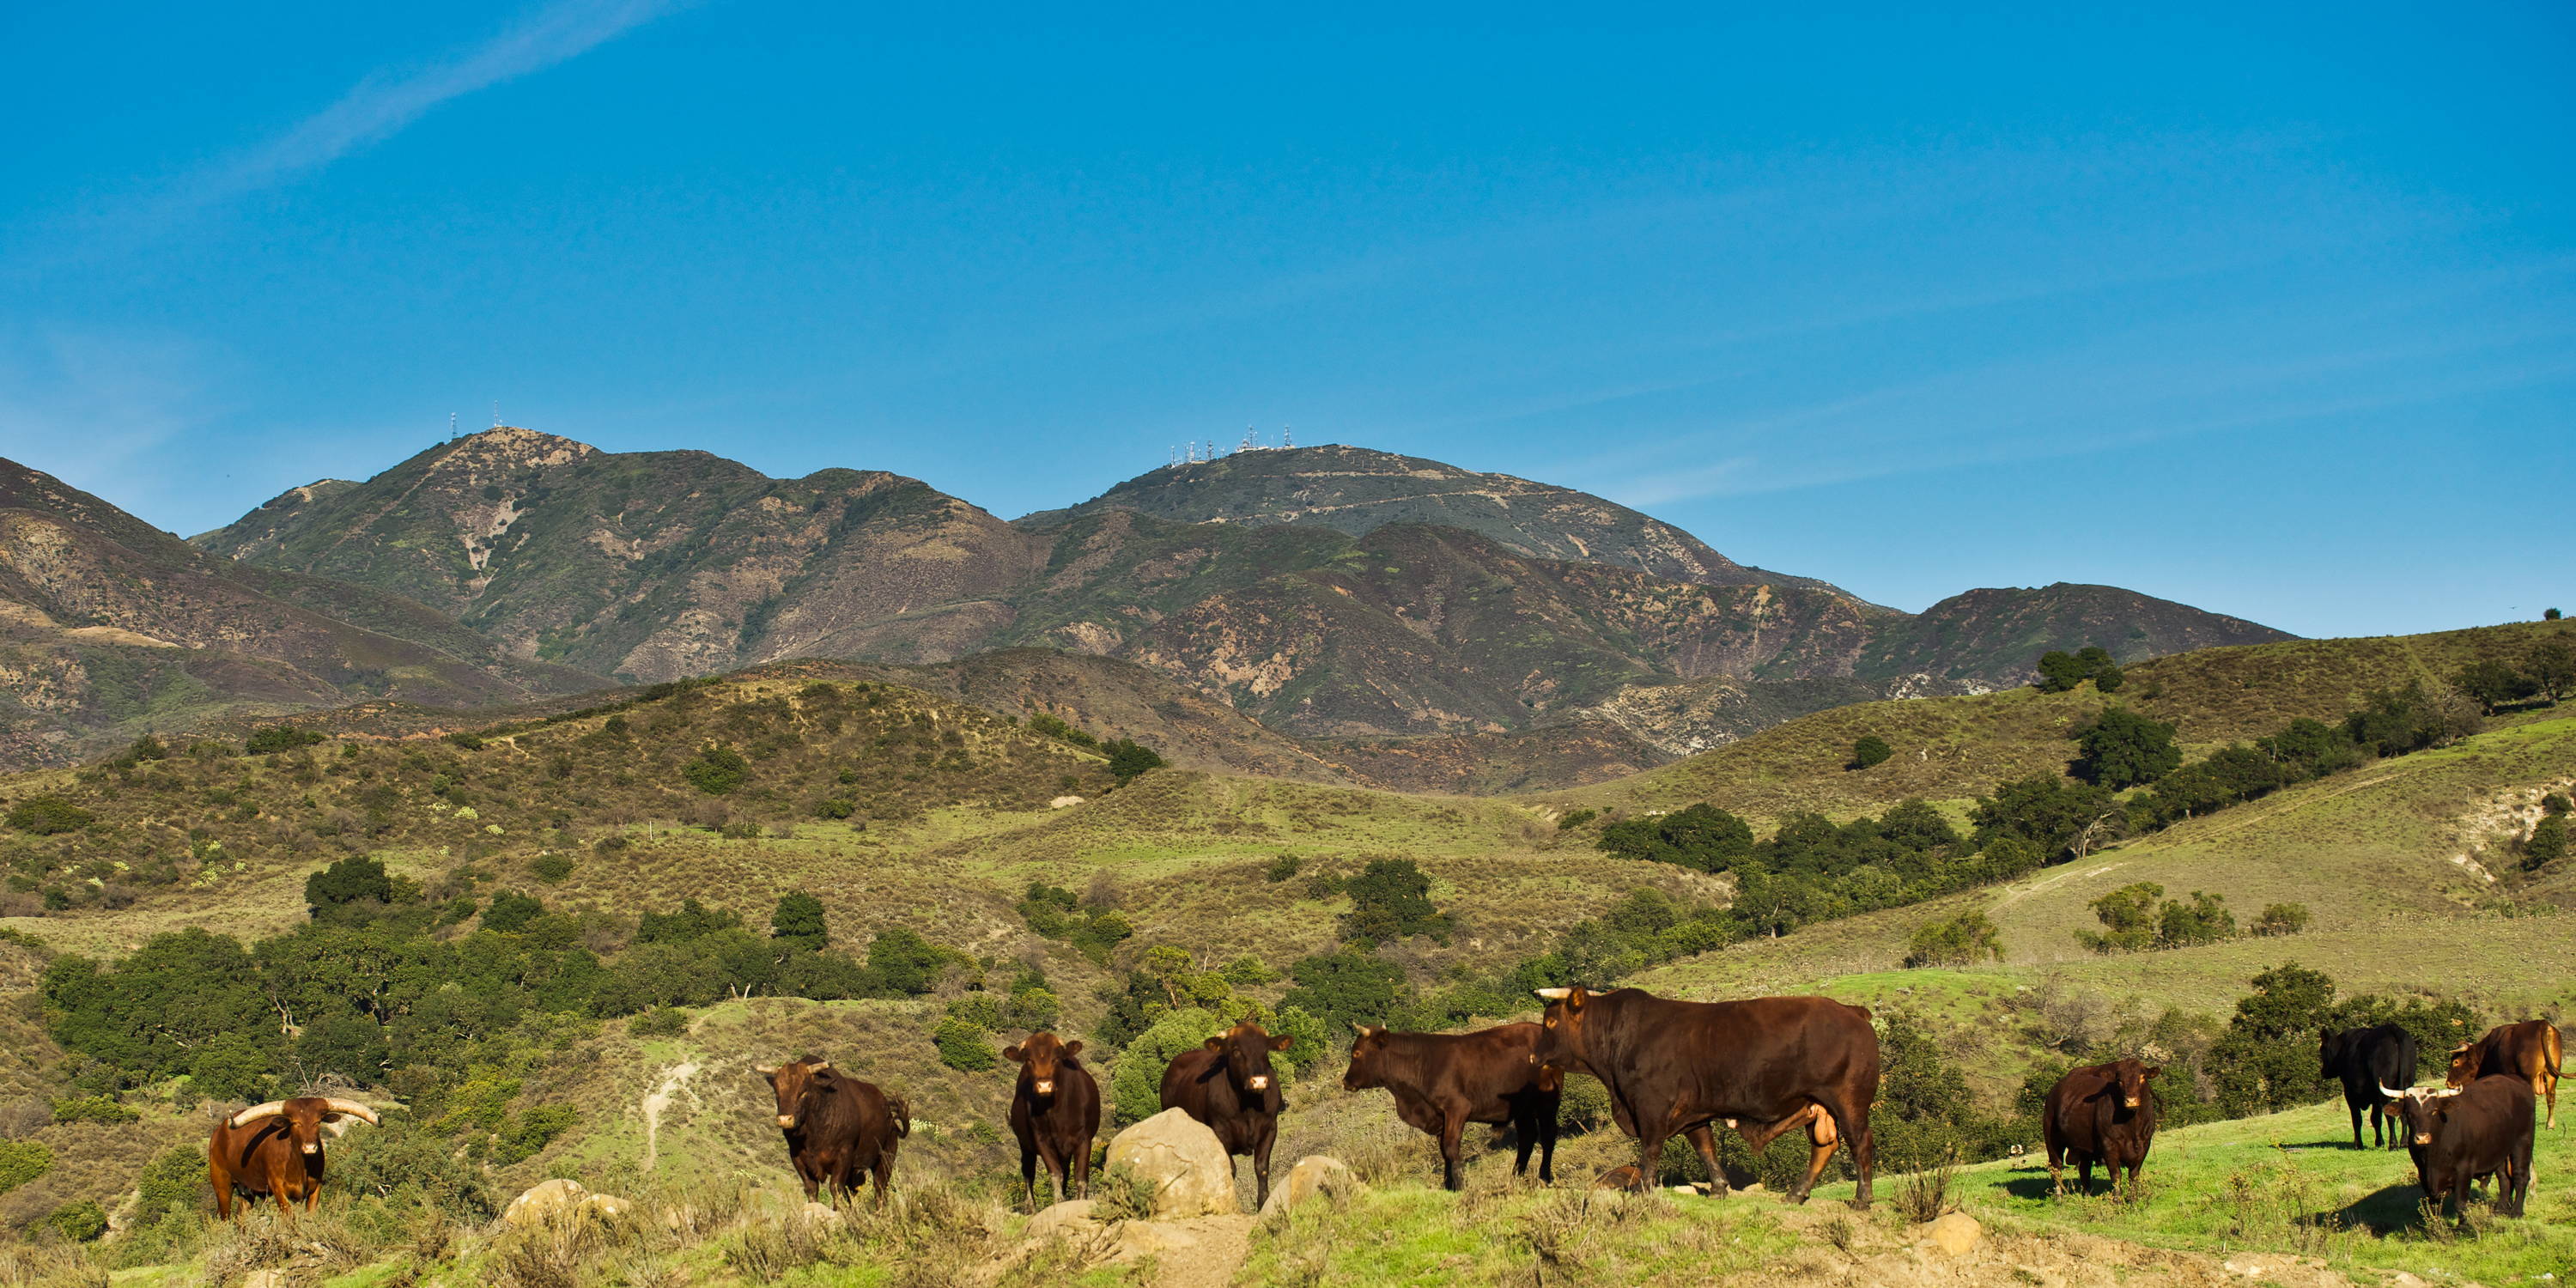 Horned brown barzona bull with rolling hills and blue sky